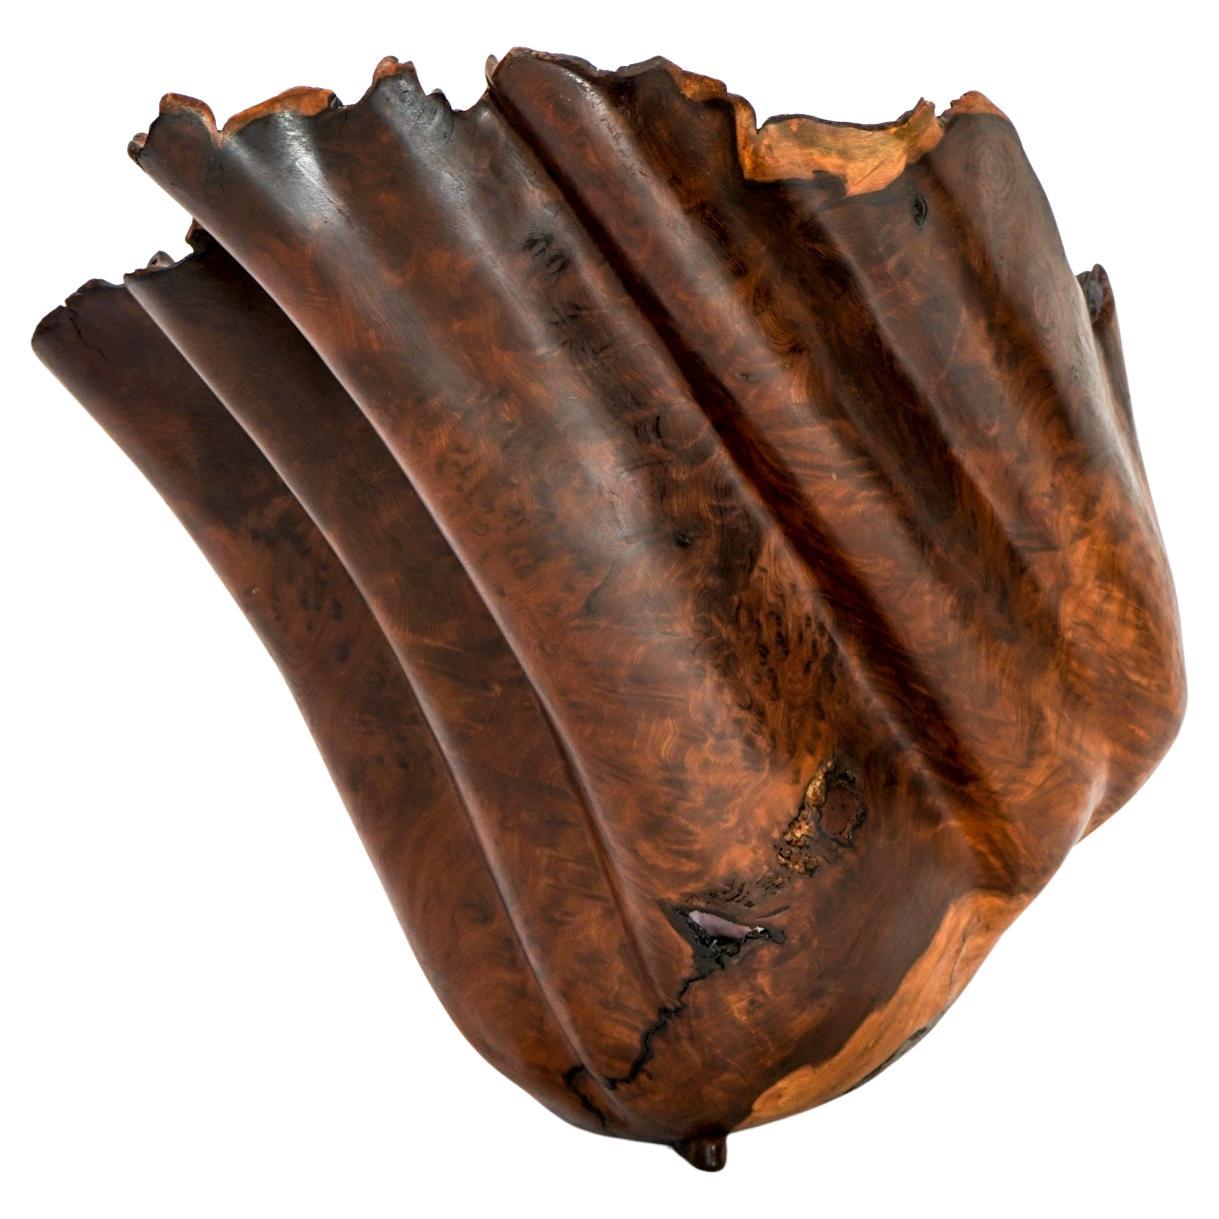 Brad Sells Organic Modern Redwood Abstract Vessel Sculpture 1997 For Sale